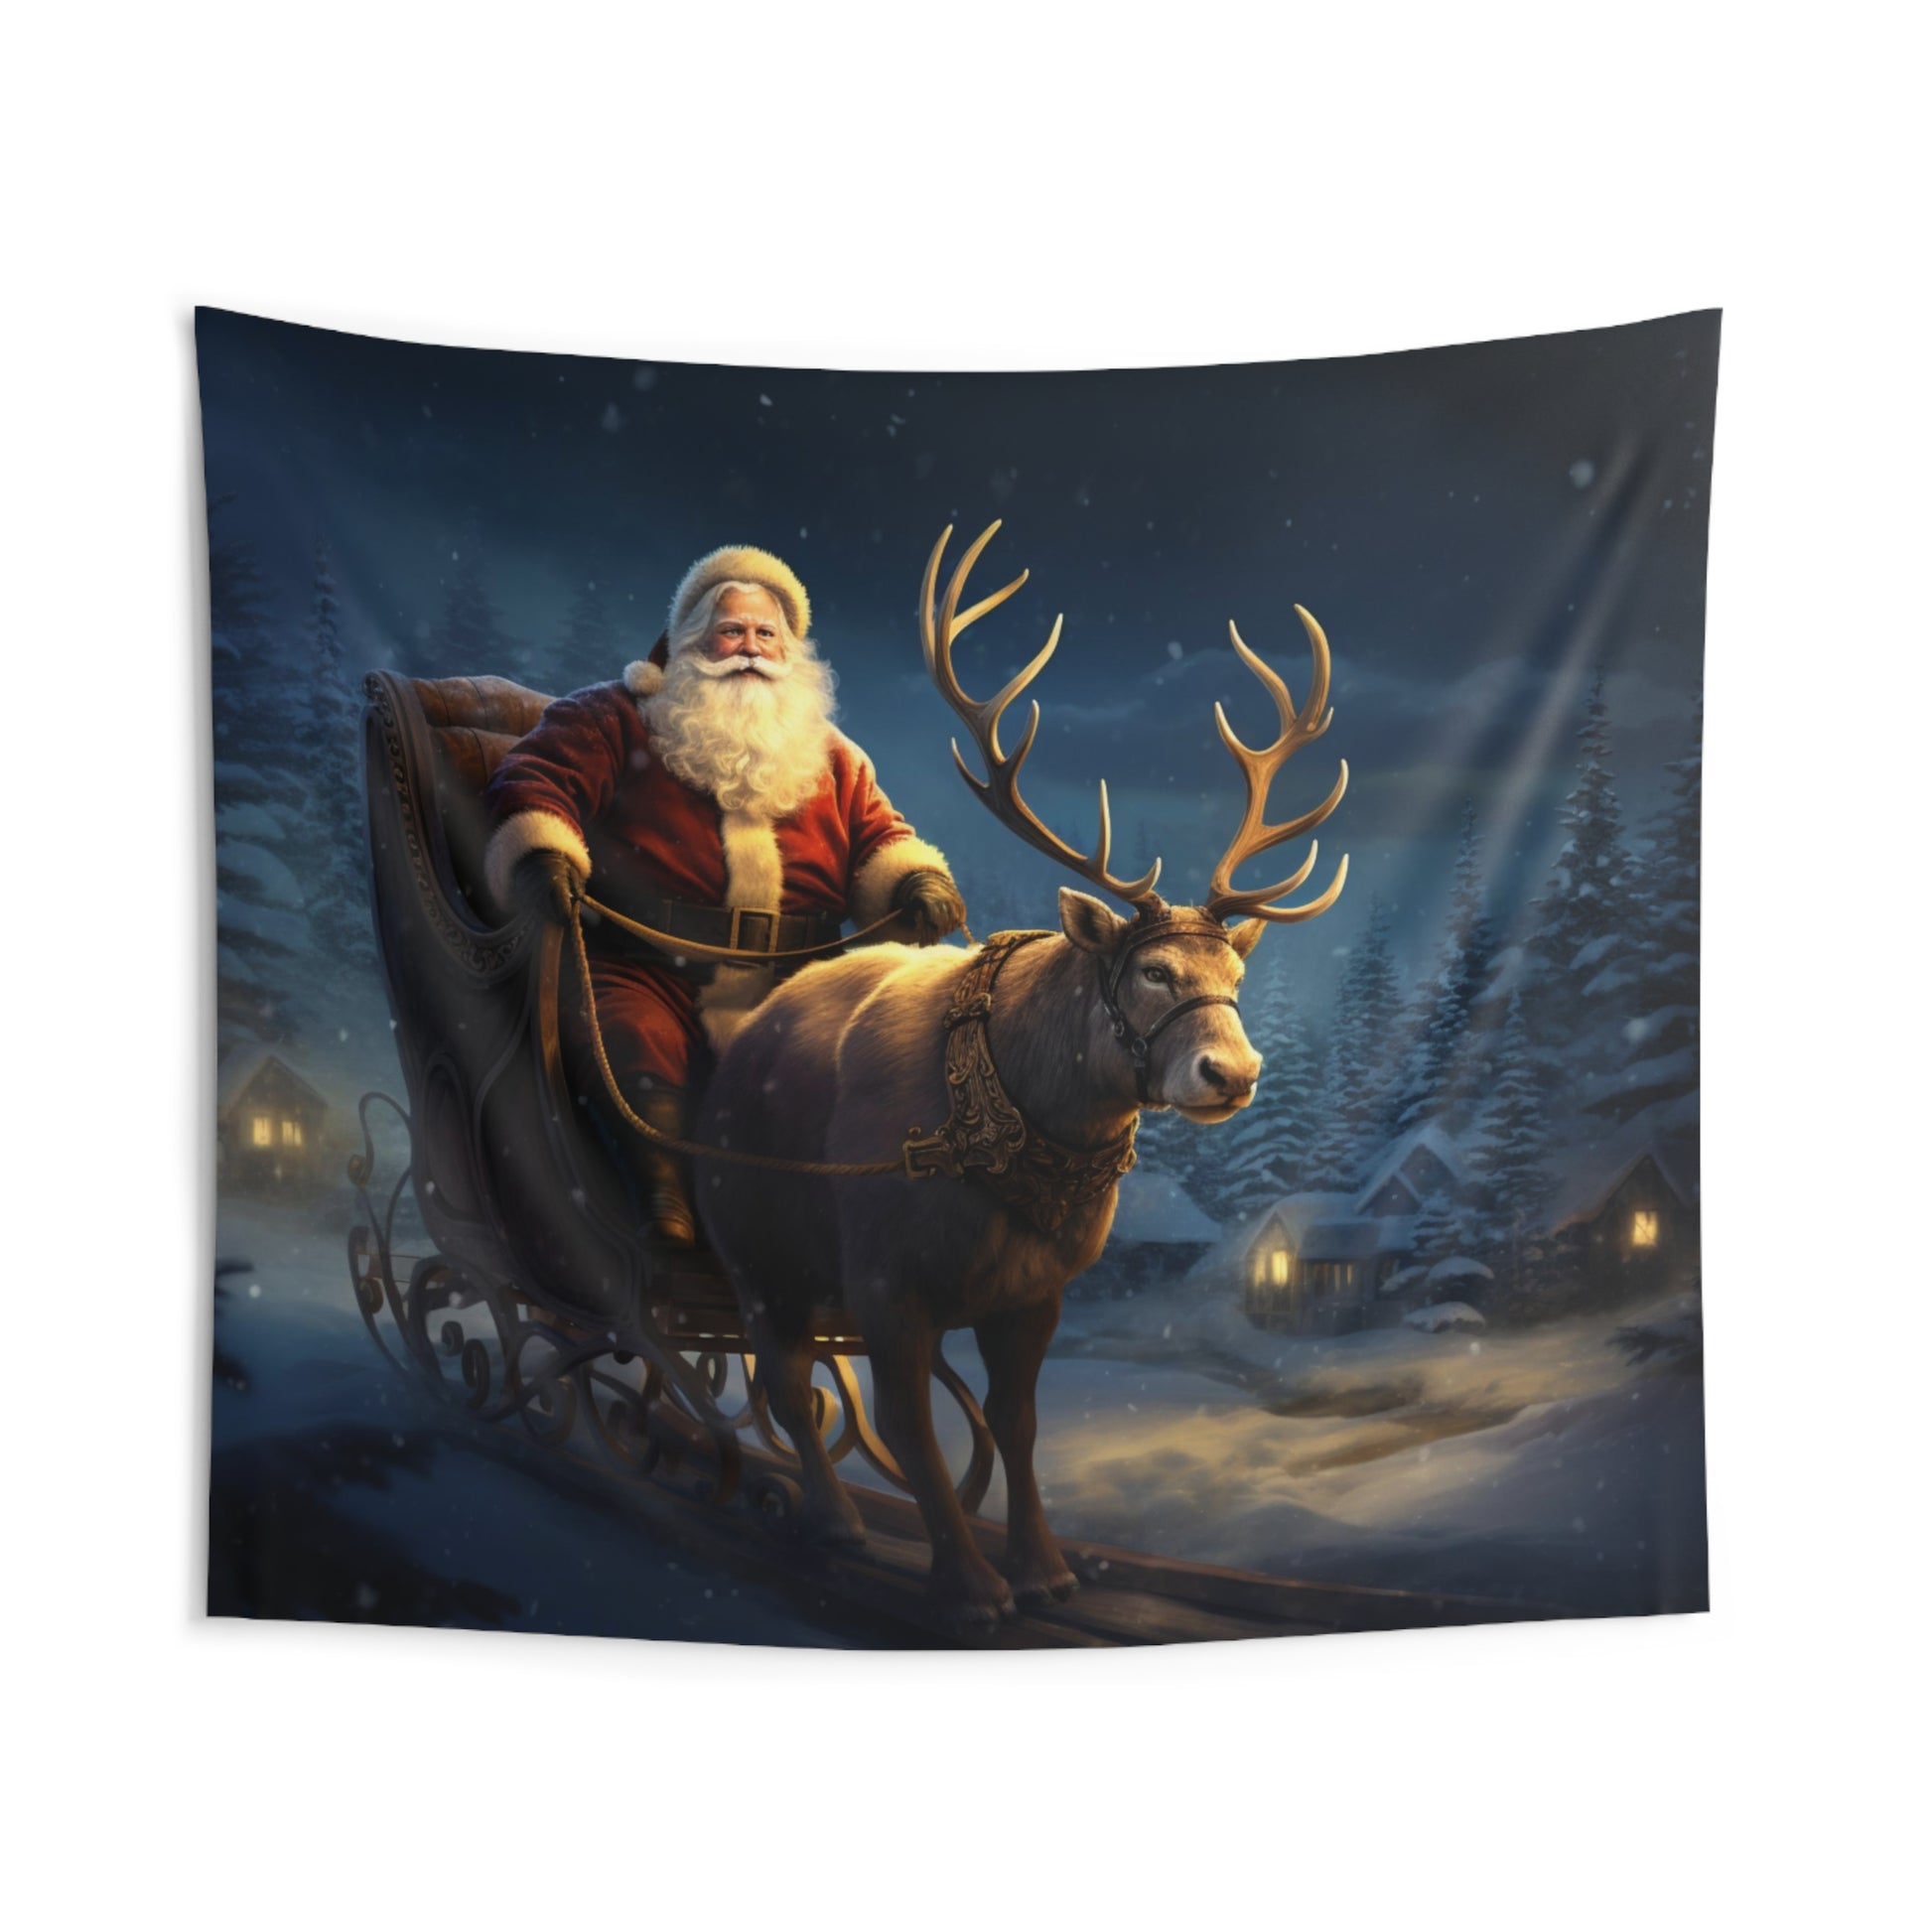 Santa Claus Sleigh Tapestry, Reindeer Night Sky Wall Art Hanging Landscape Cool Unique Aesthetic Large Small Decor Bedroom College Dorm Starcove Fashion